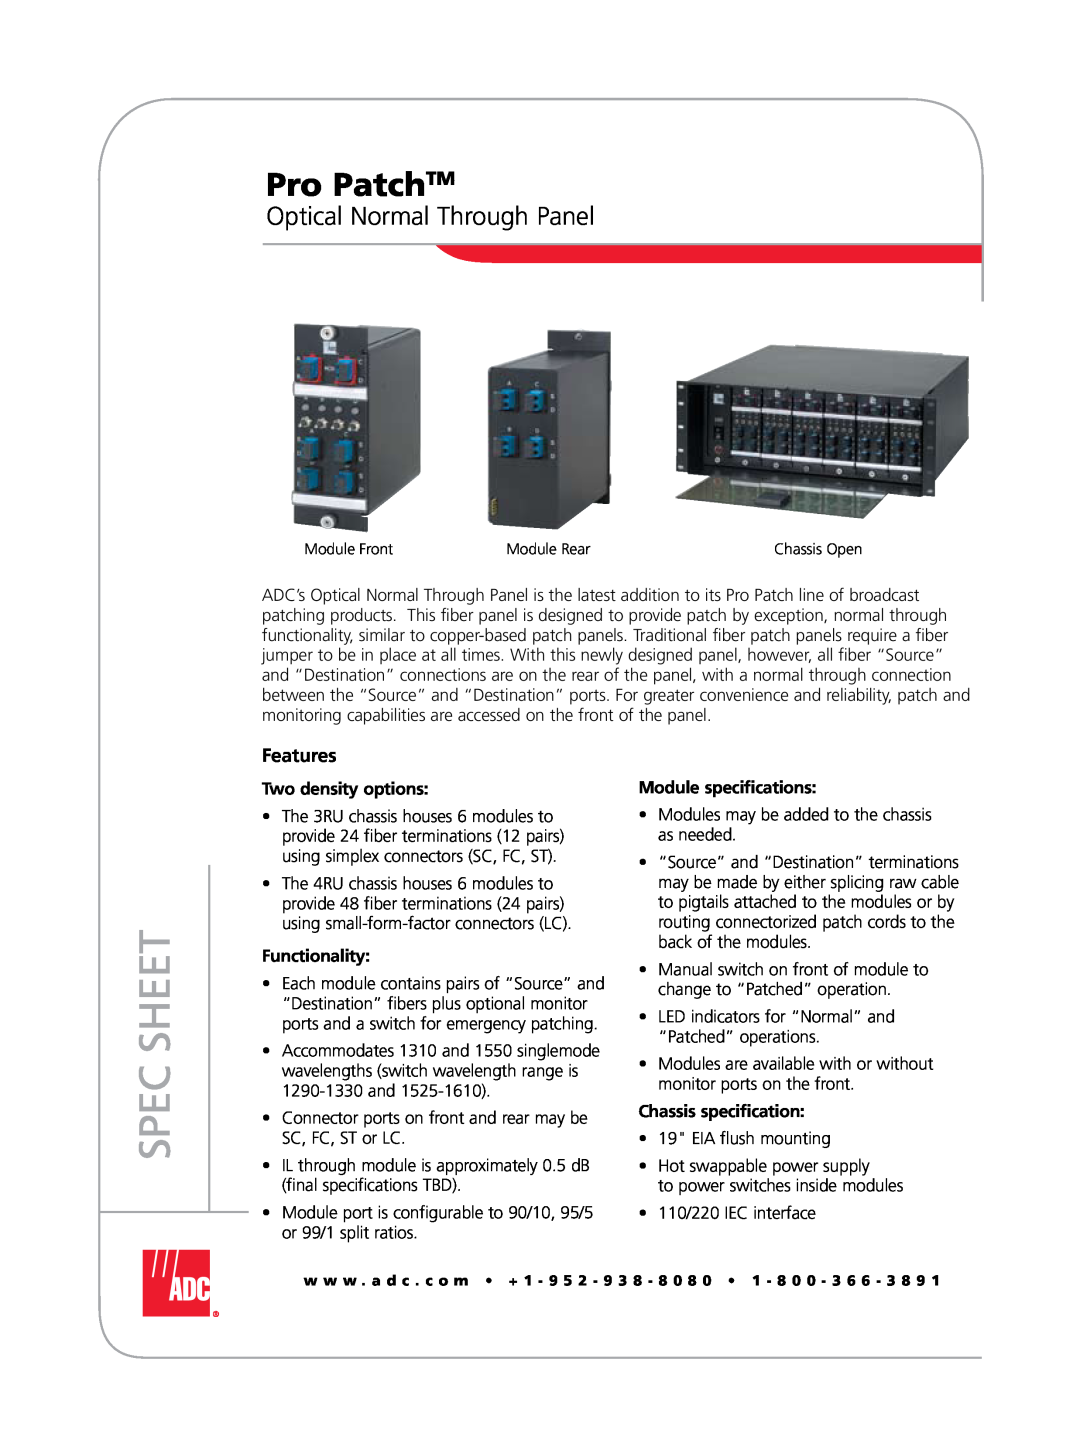 ADC specifications Pro PatchTM, Optical Normal Through Panel, Features, Spec Sheet, Two density options, Functionality 